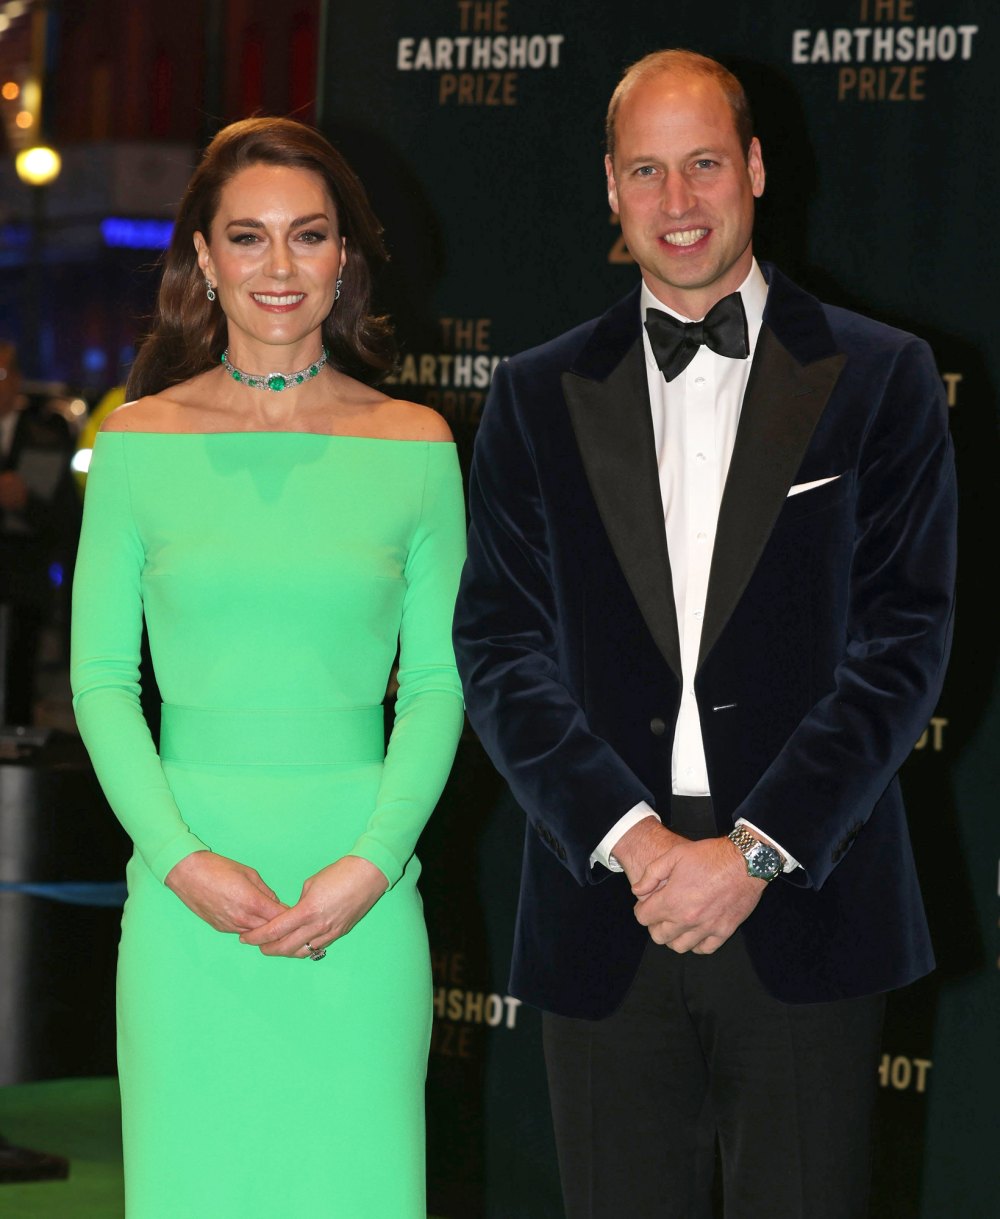 Prince William Reveals Why Kate Middleton Skipped Singapore Trip